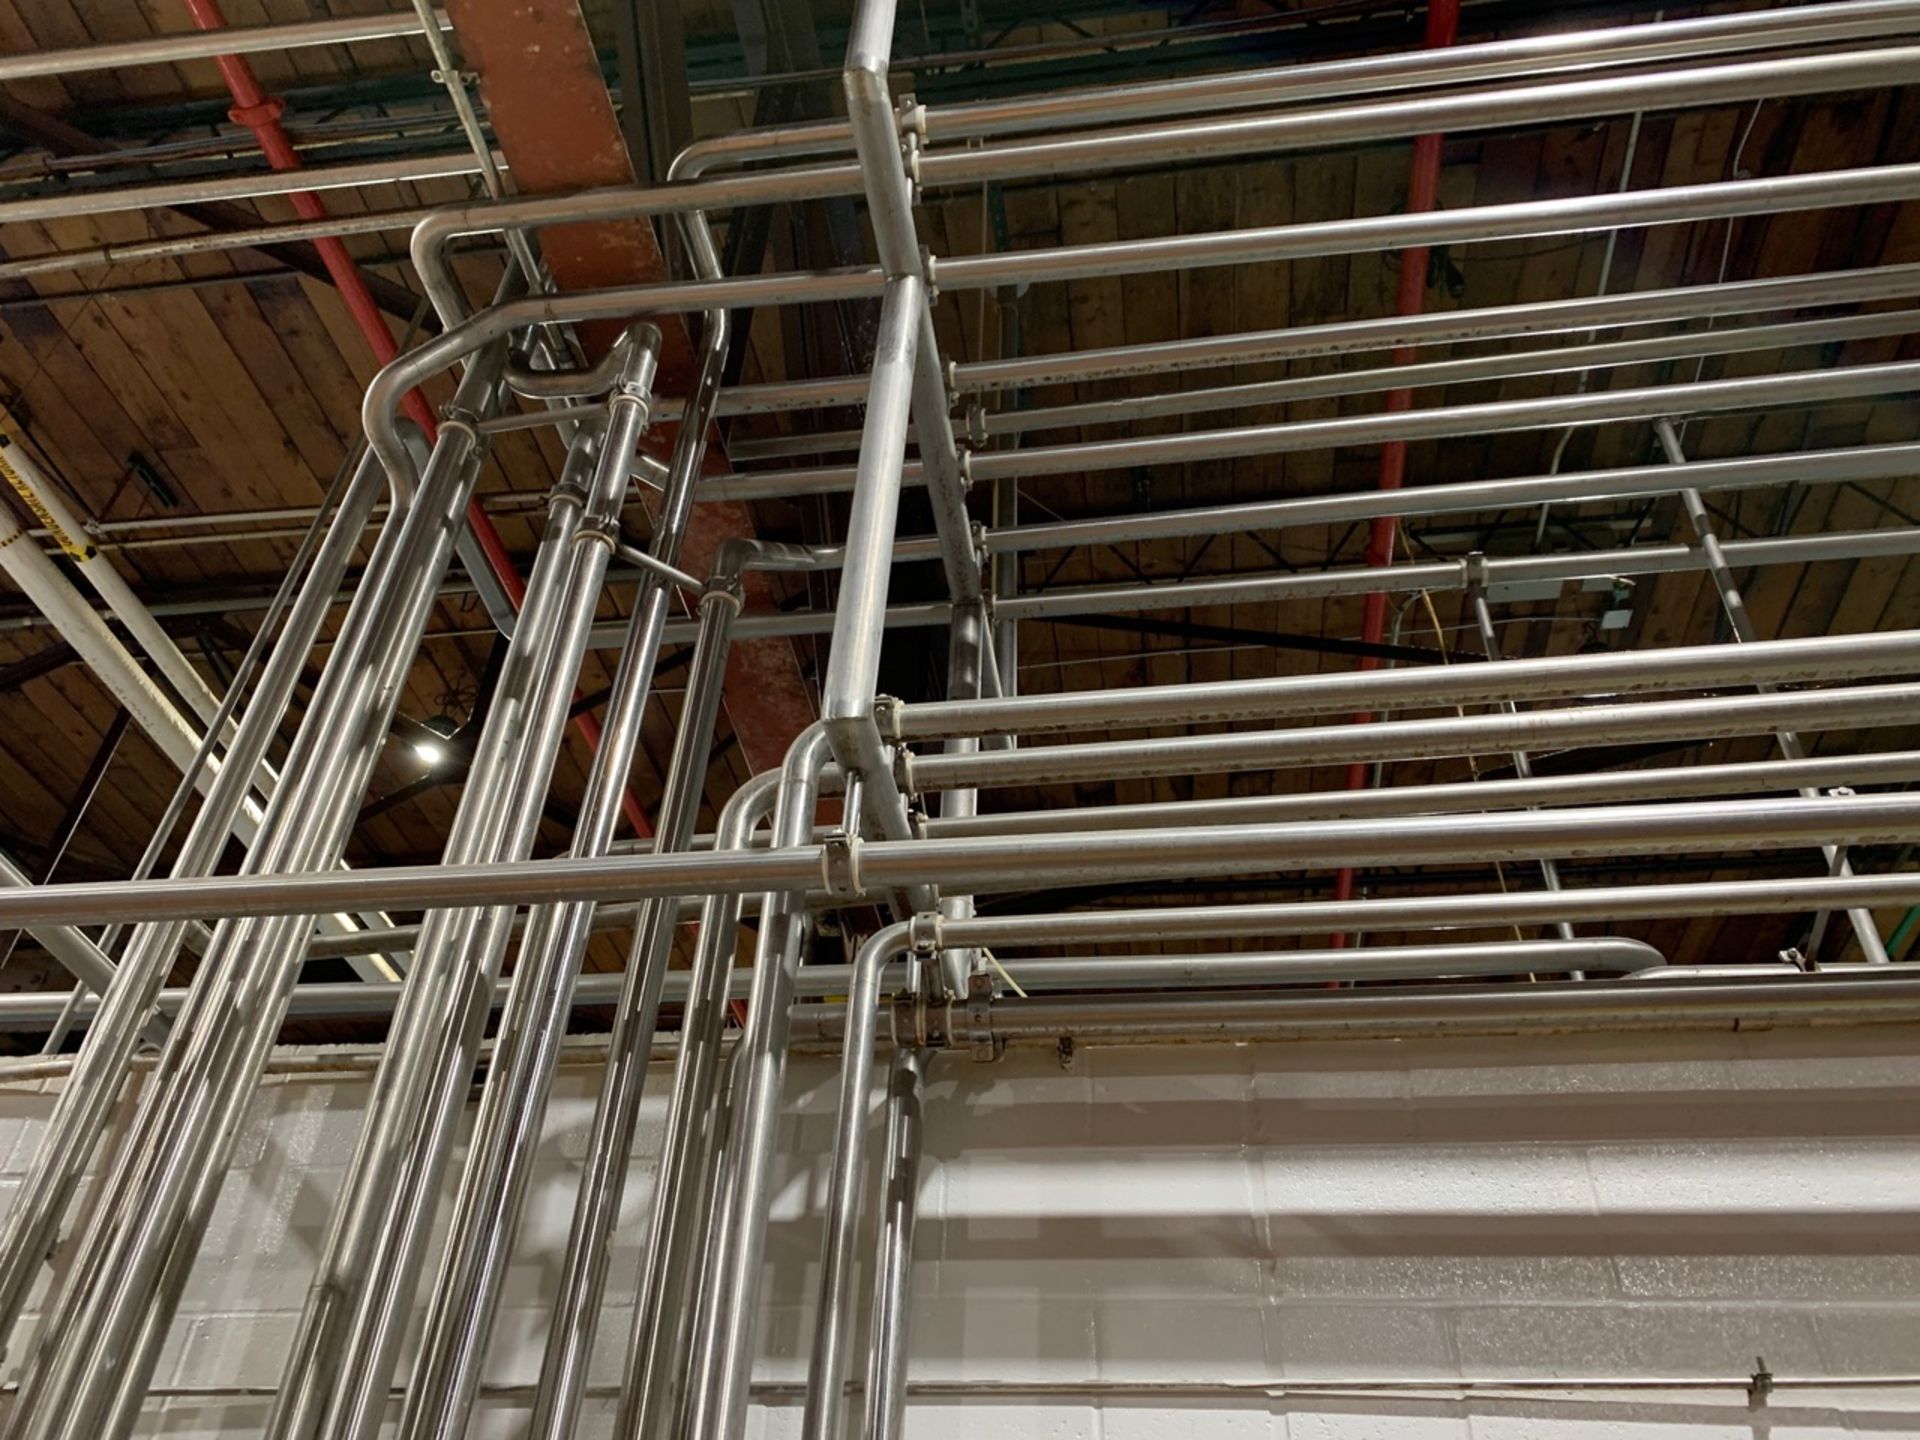 Lot of Stainless Steel Piping in Ceiling - 2 Inch - Image 3 of 6